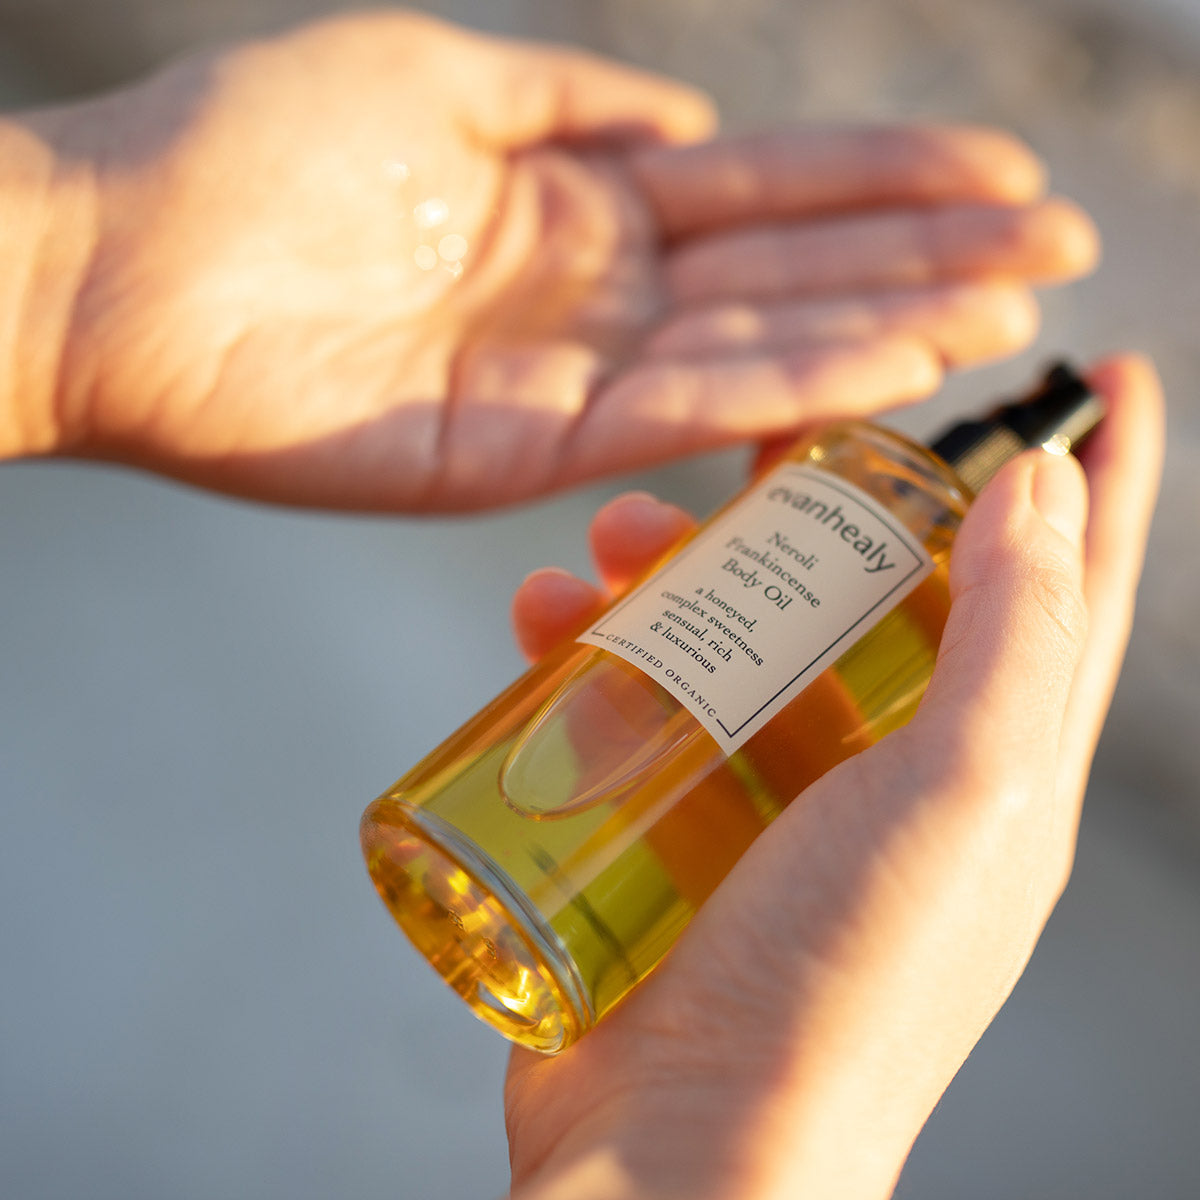 model showing bottle and texture of neroli frankincense body oil